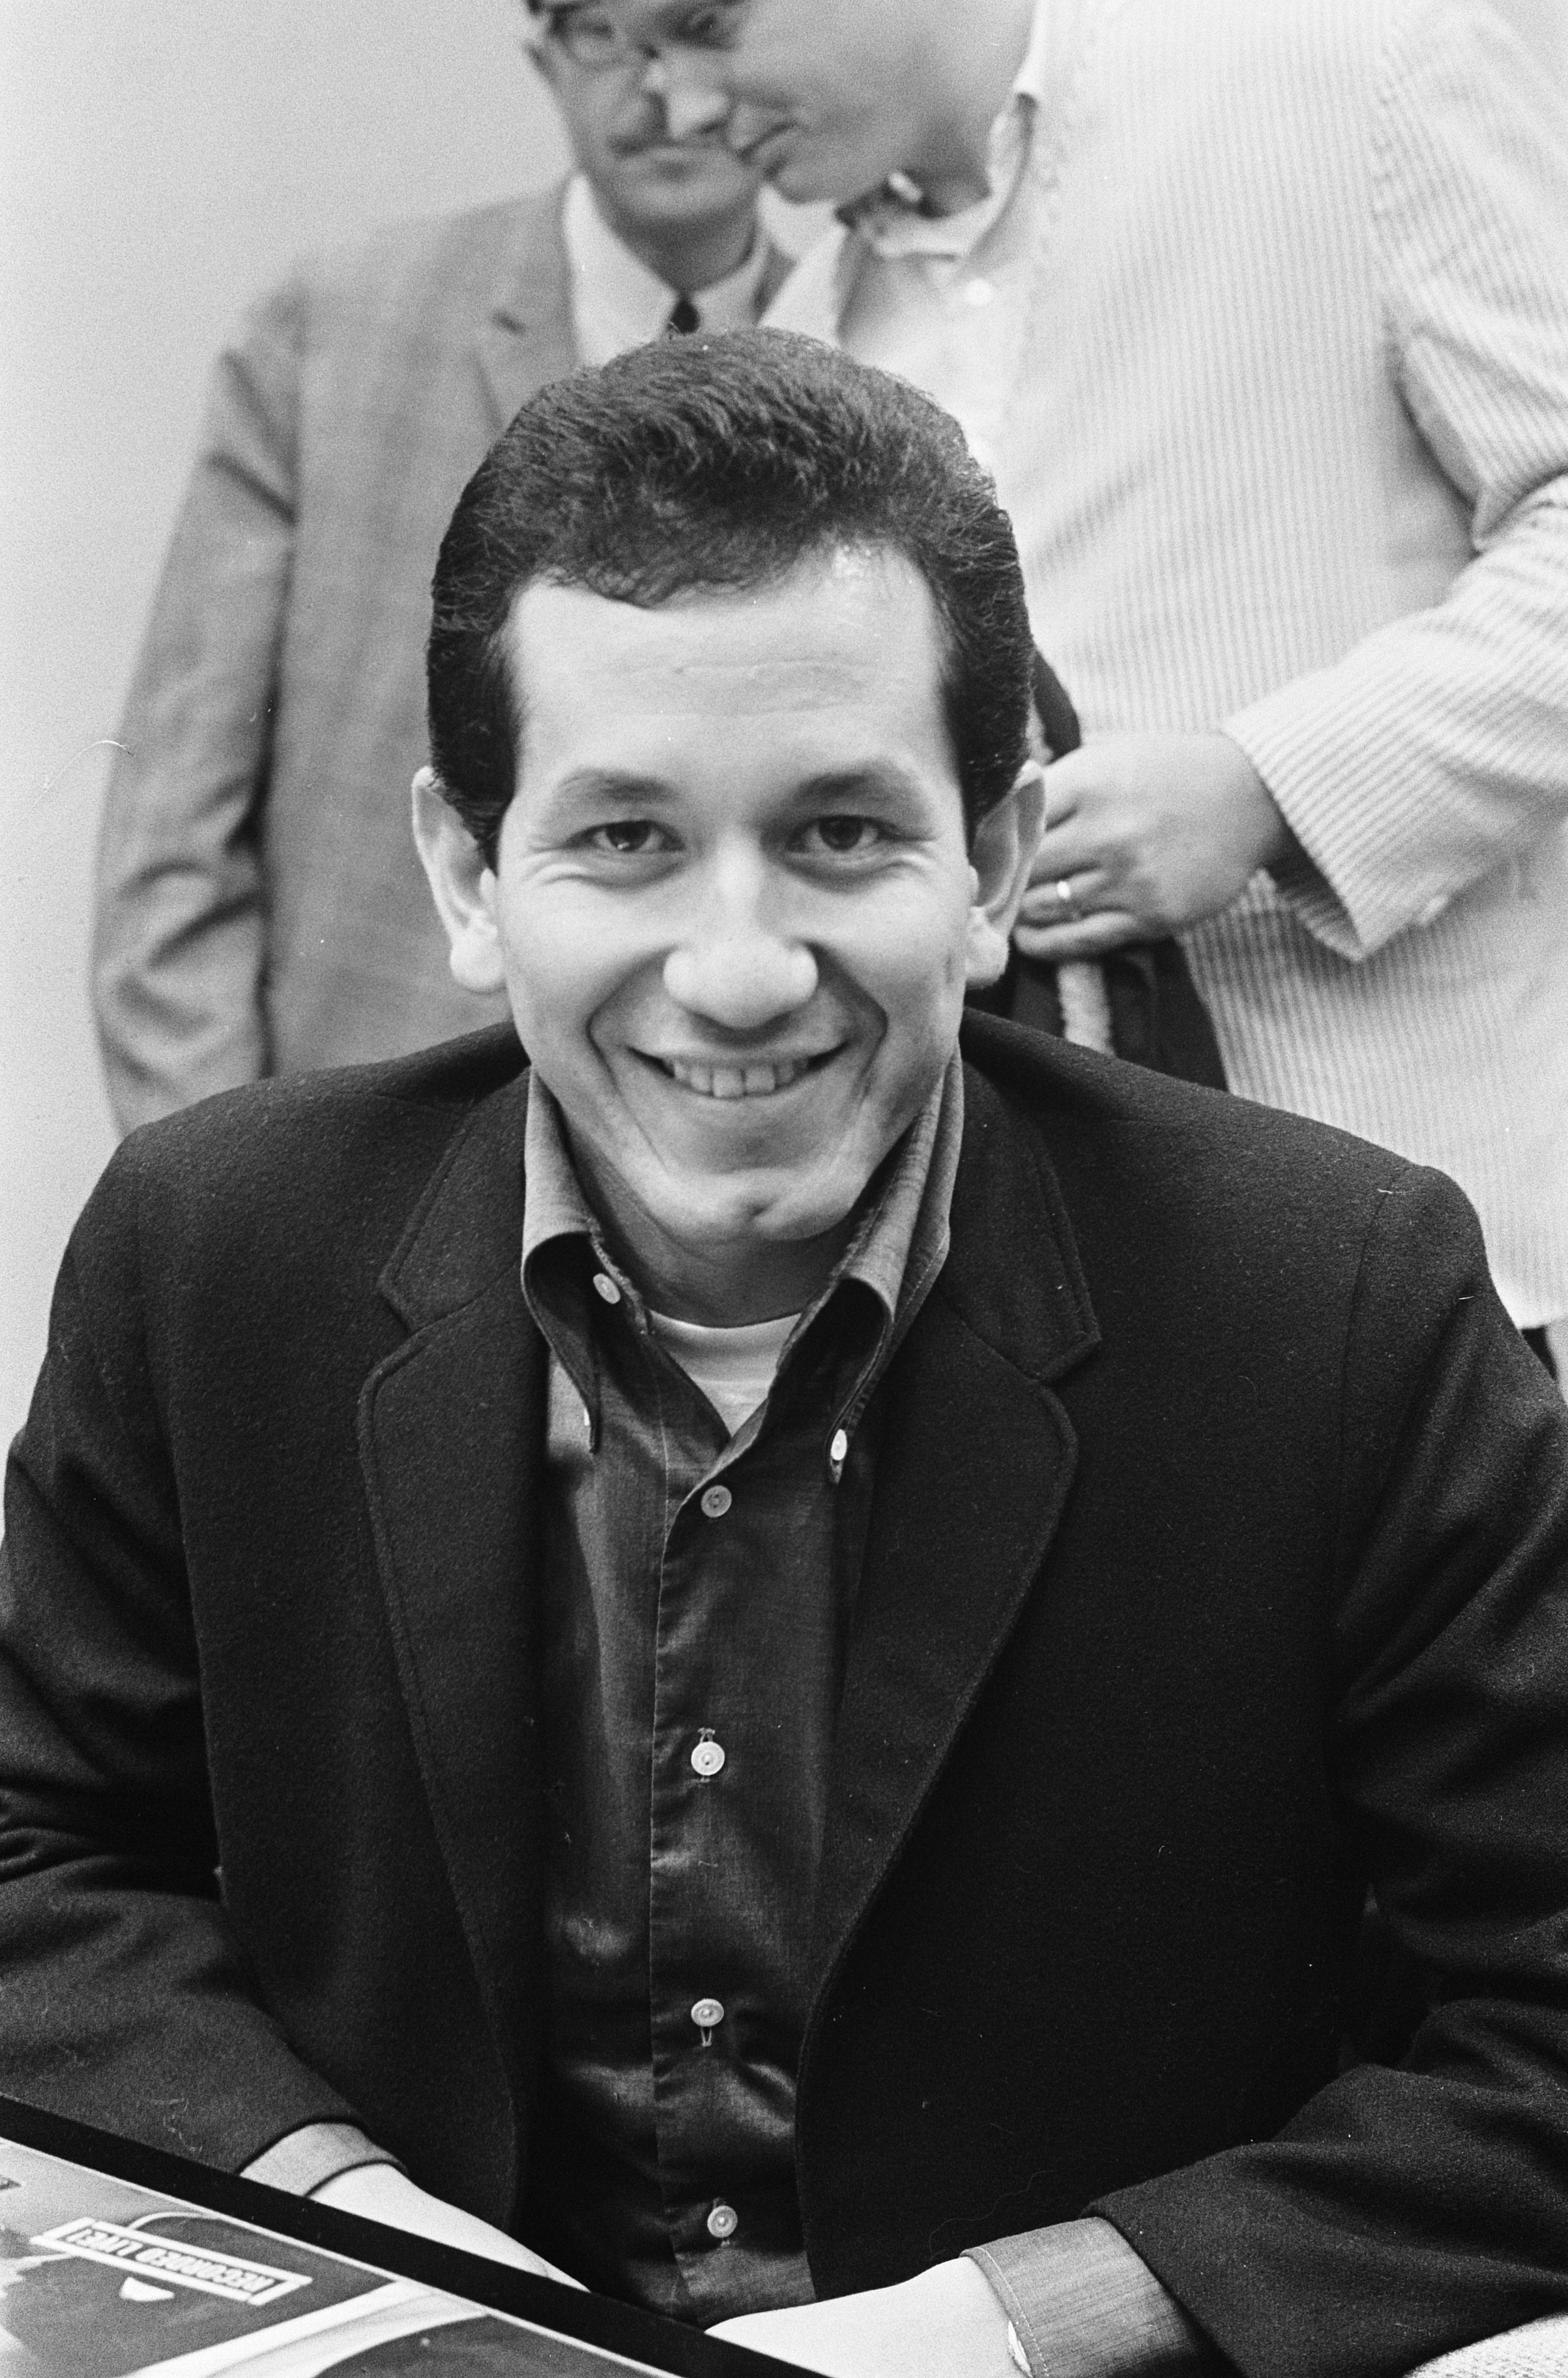 Trini Lopez at Schiphol to attend the Grand Gala du Disque. | Photo: Hugo van Gelderen , creator 915-6212, CC0 BY 1.0, Wikimedia Commons